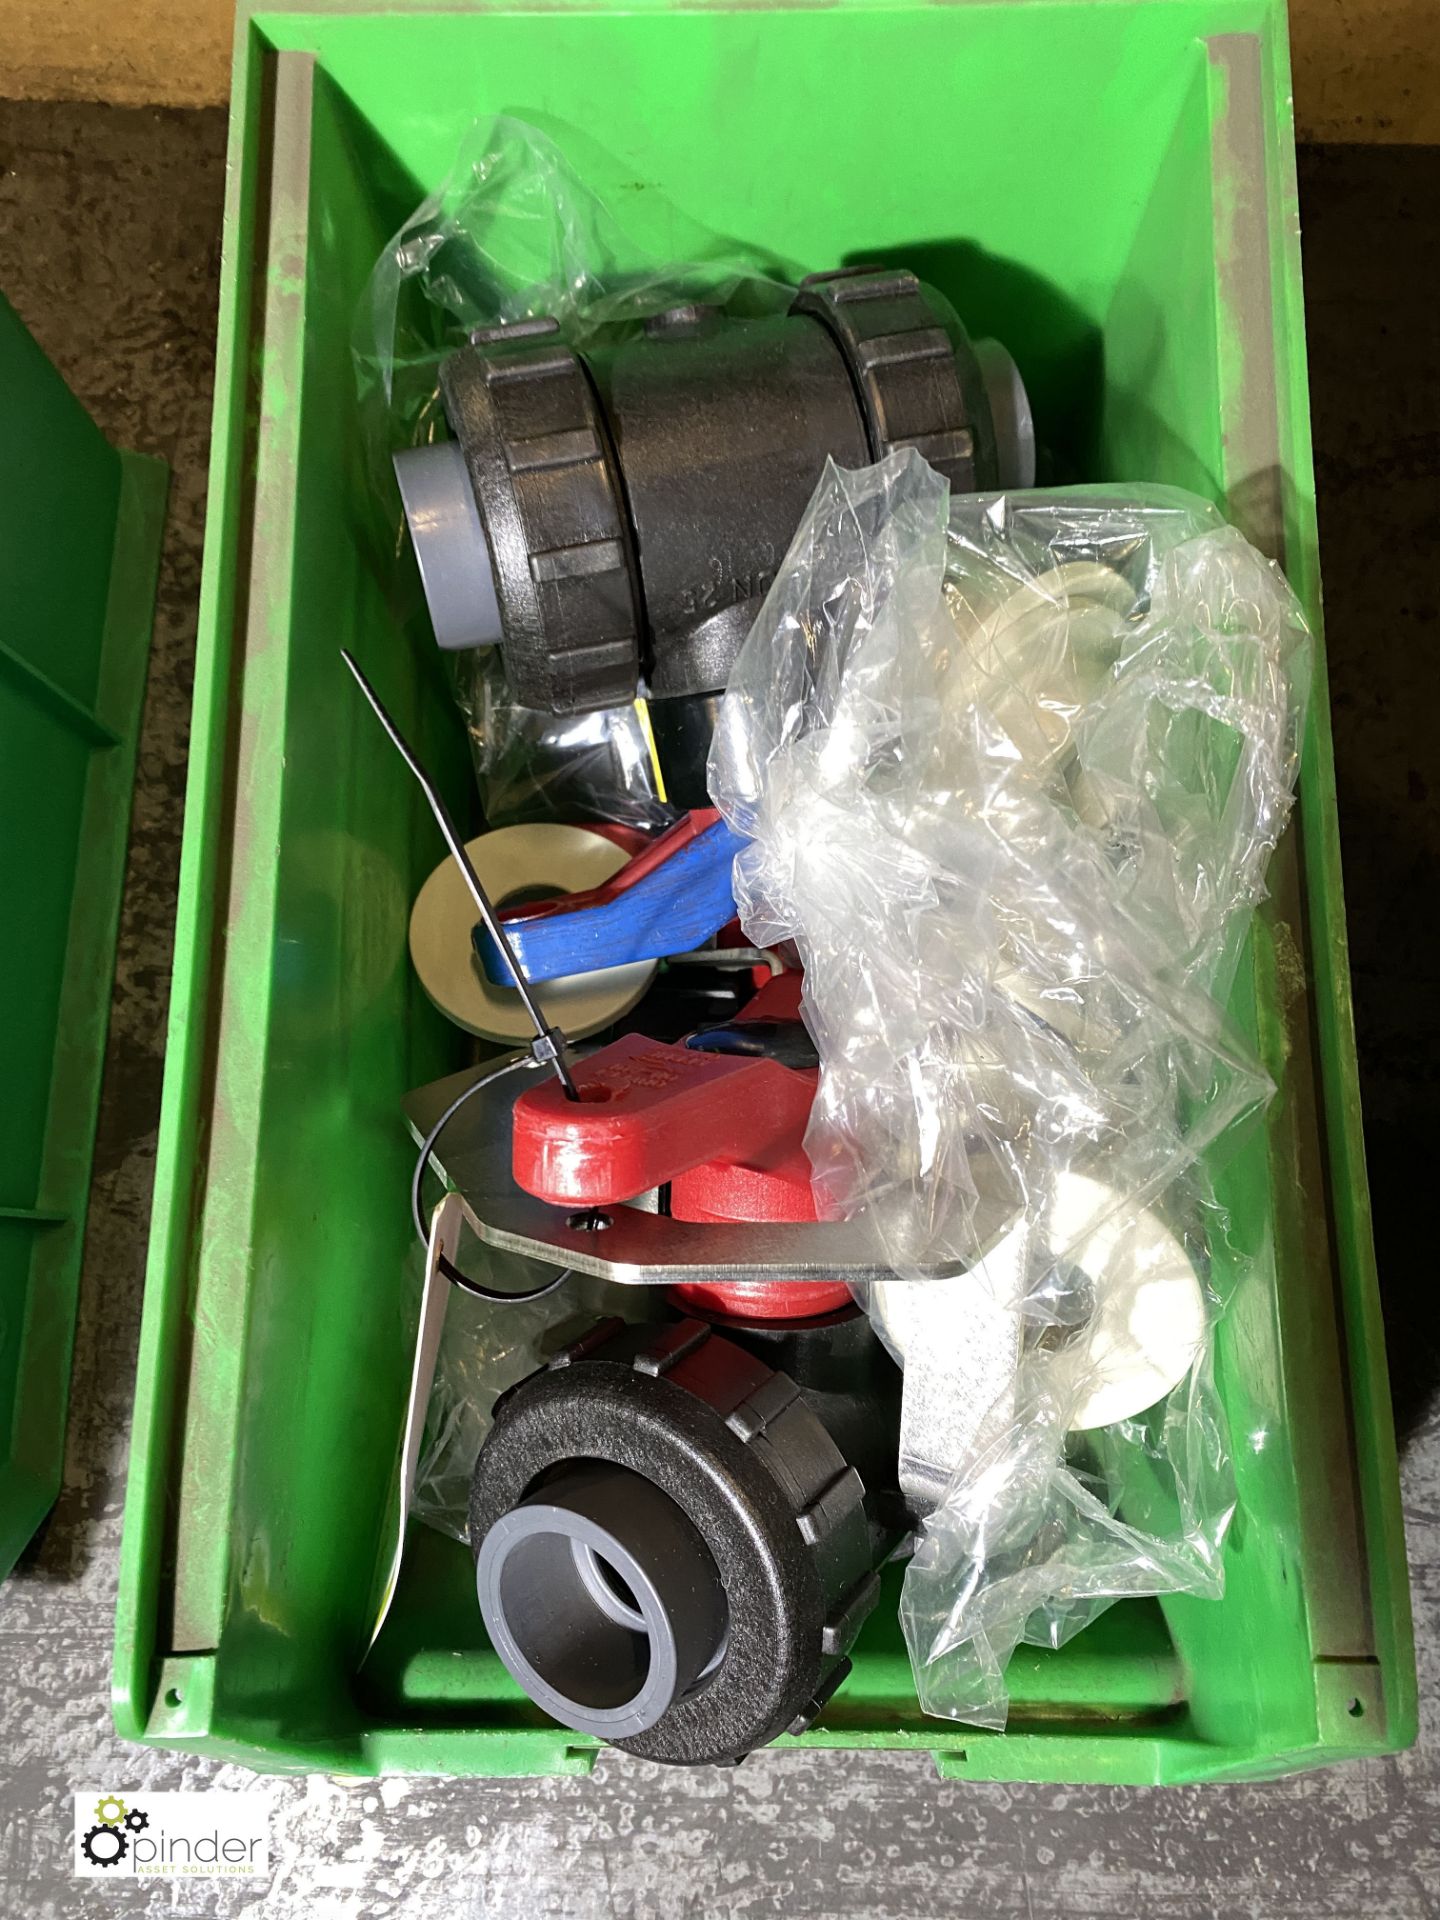 2 Safi Ball Valves, DN20, and 2 Safi lockable Ball Valves, DN25 with socket fusion ends (please note